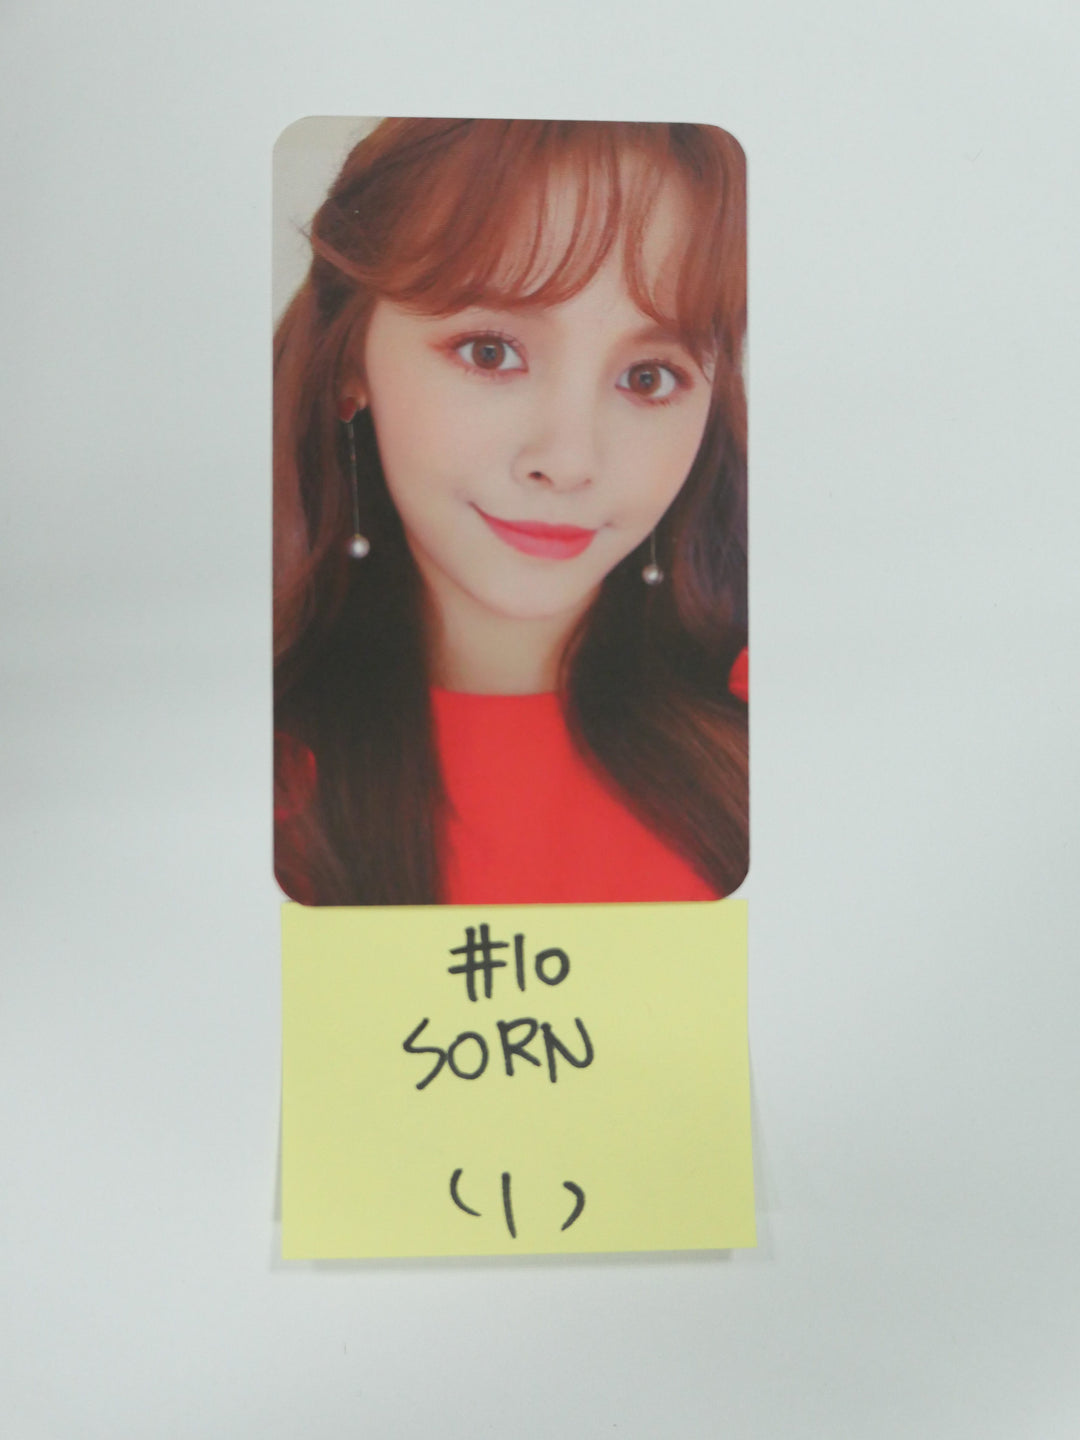 CLC - Official Photocard (OLD)